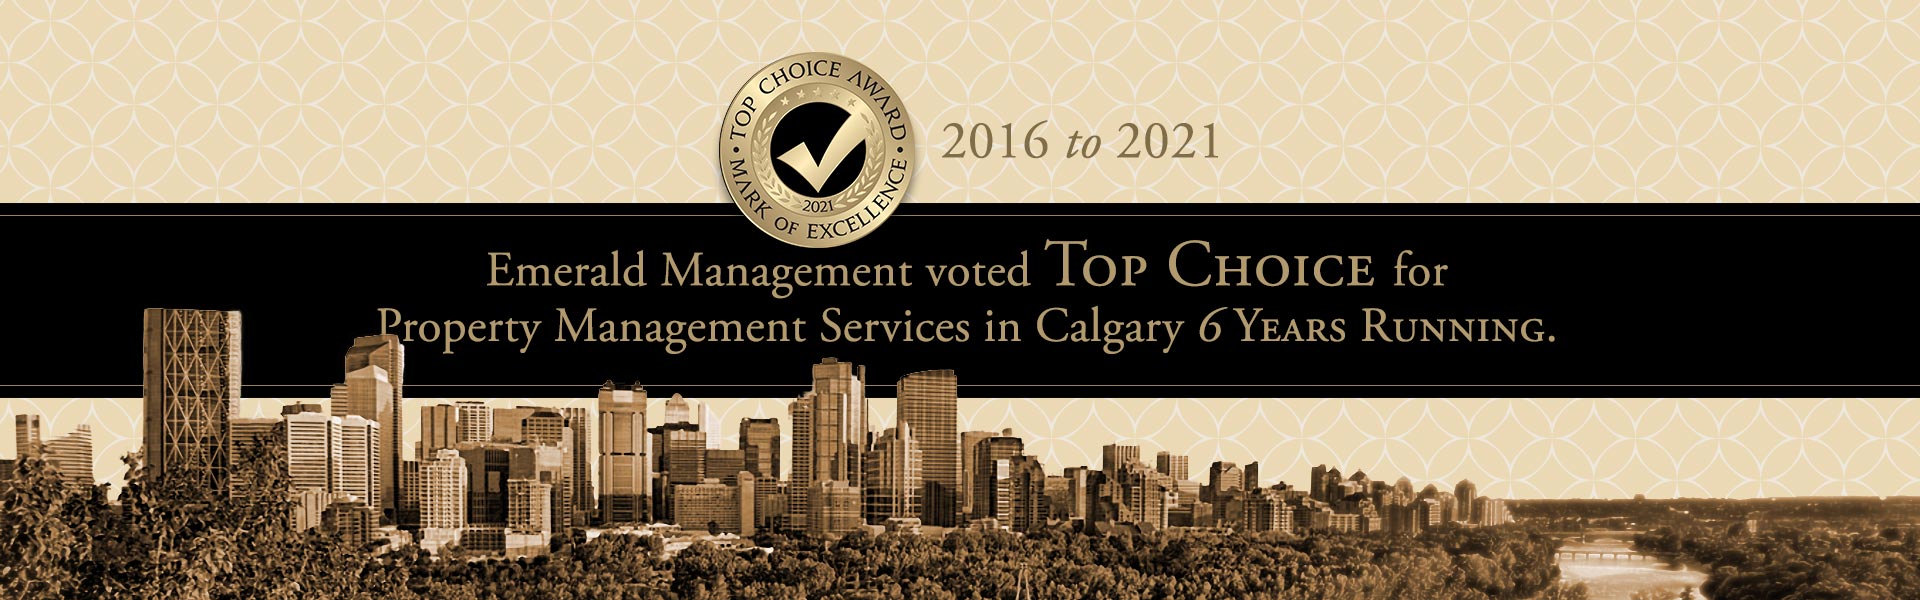 Top Choice for Property Management Services in Calgary